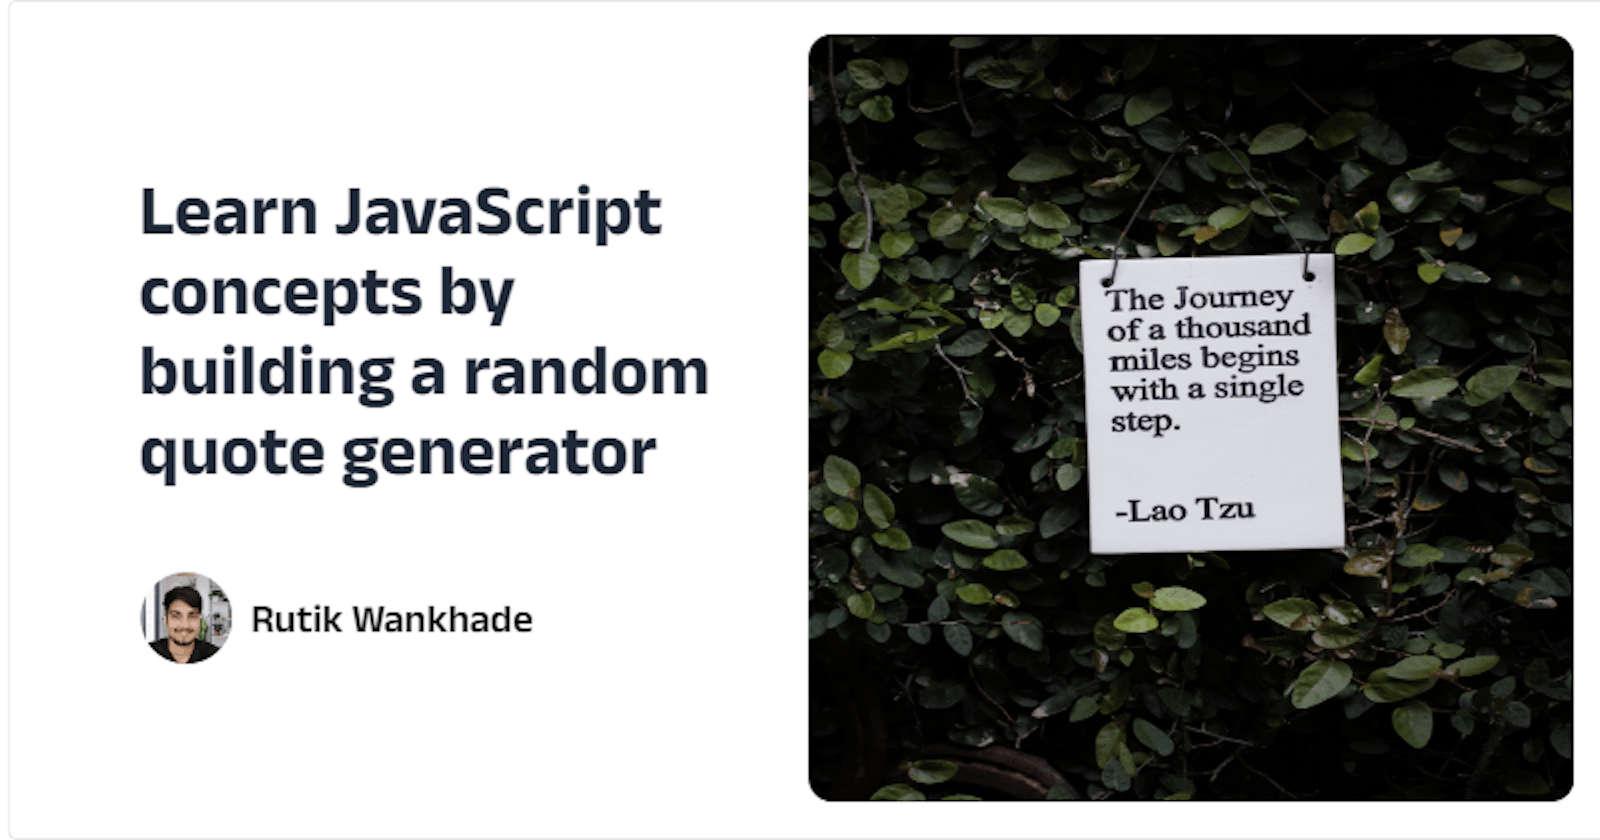 Learn JavaScript concepts by building a random quote generator